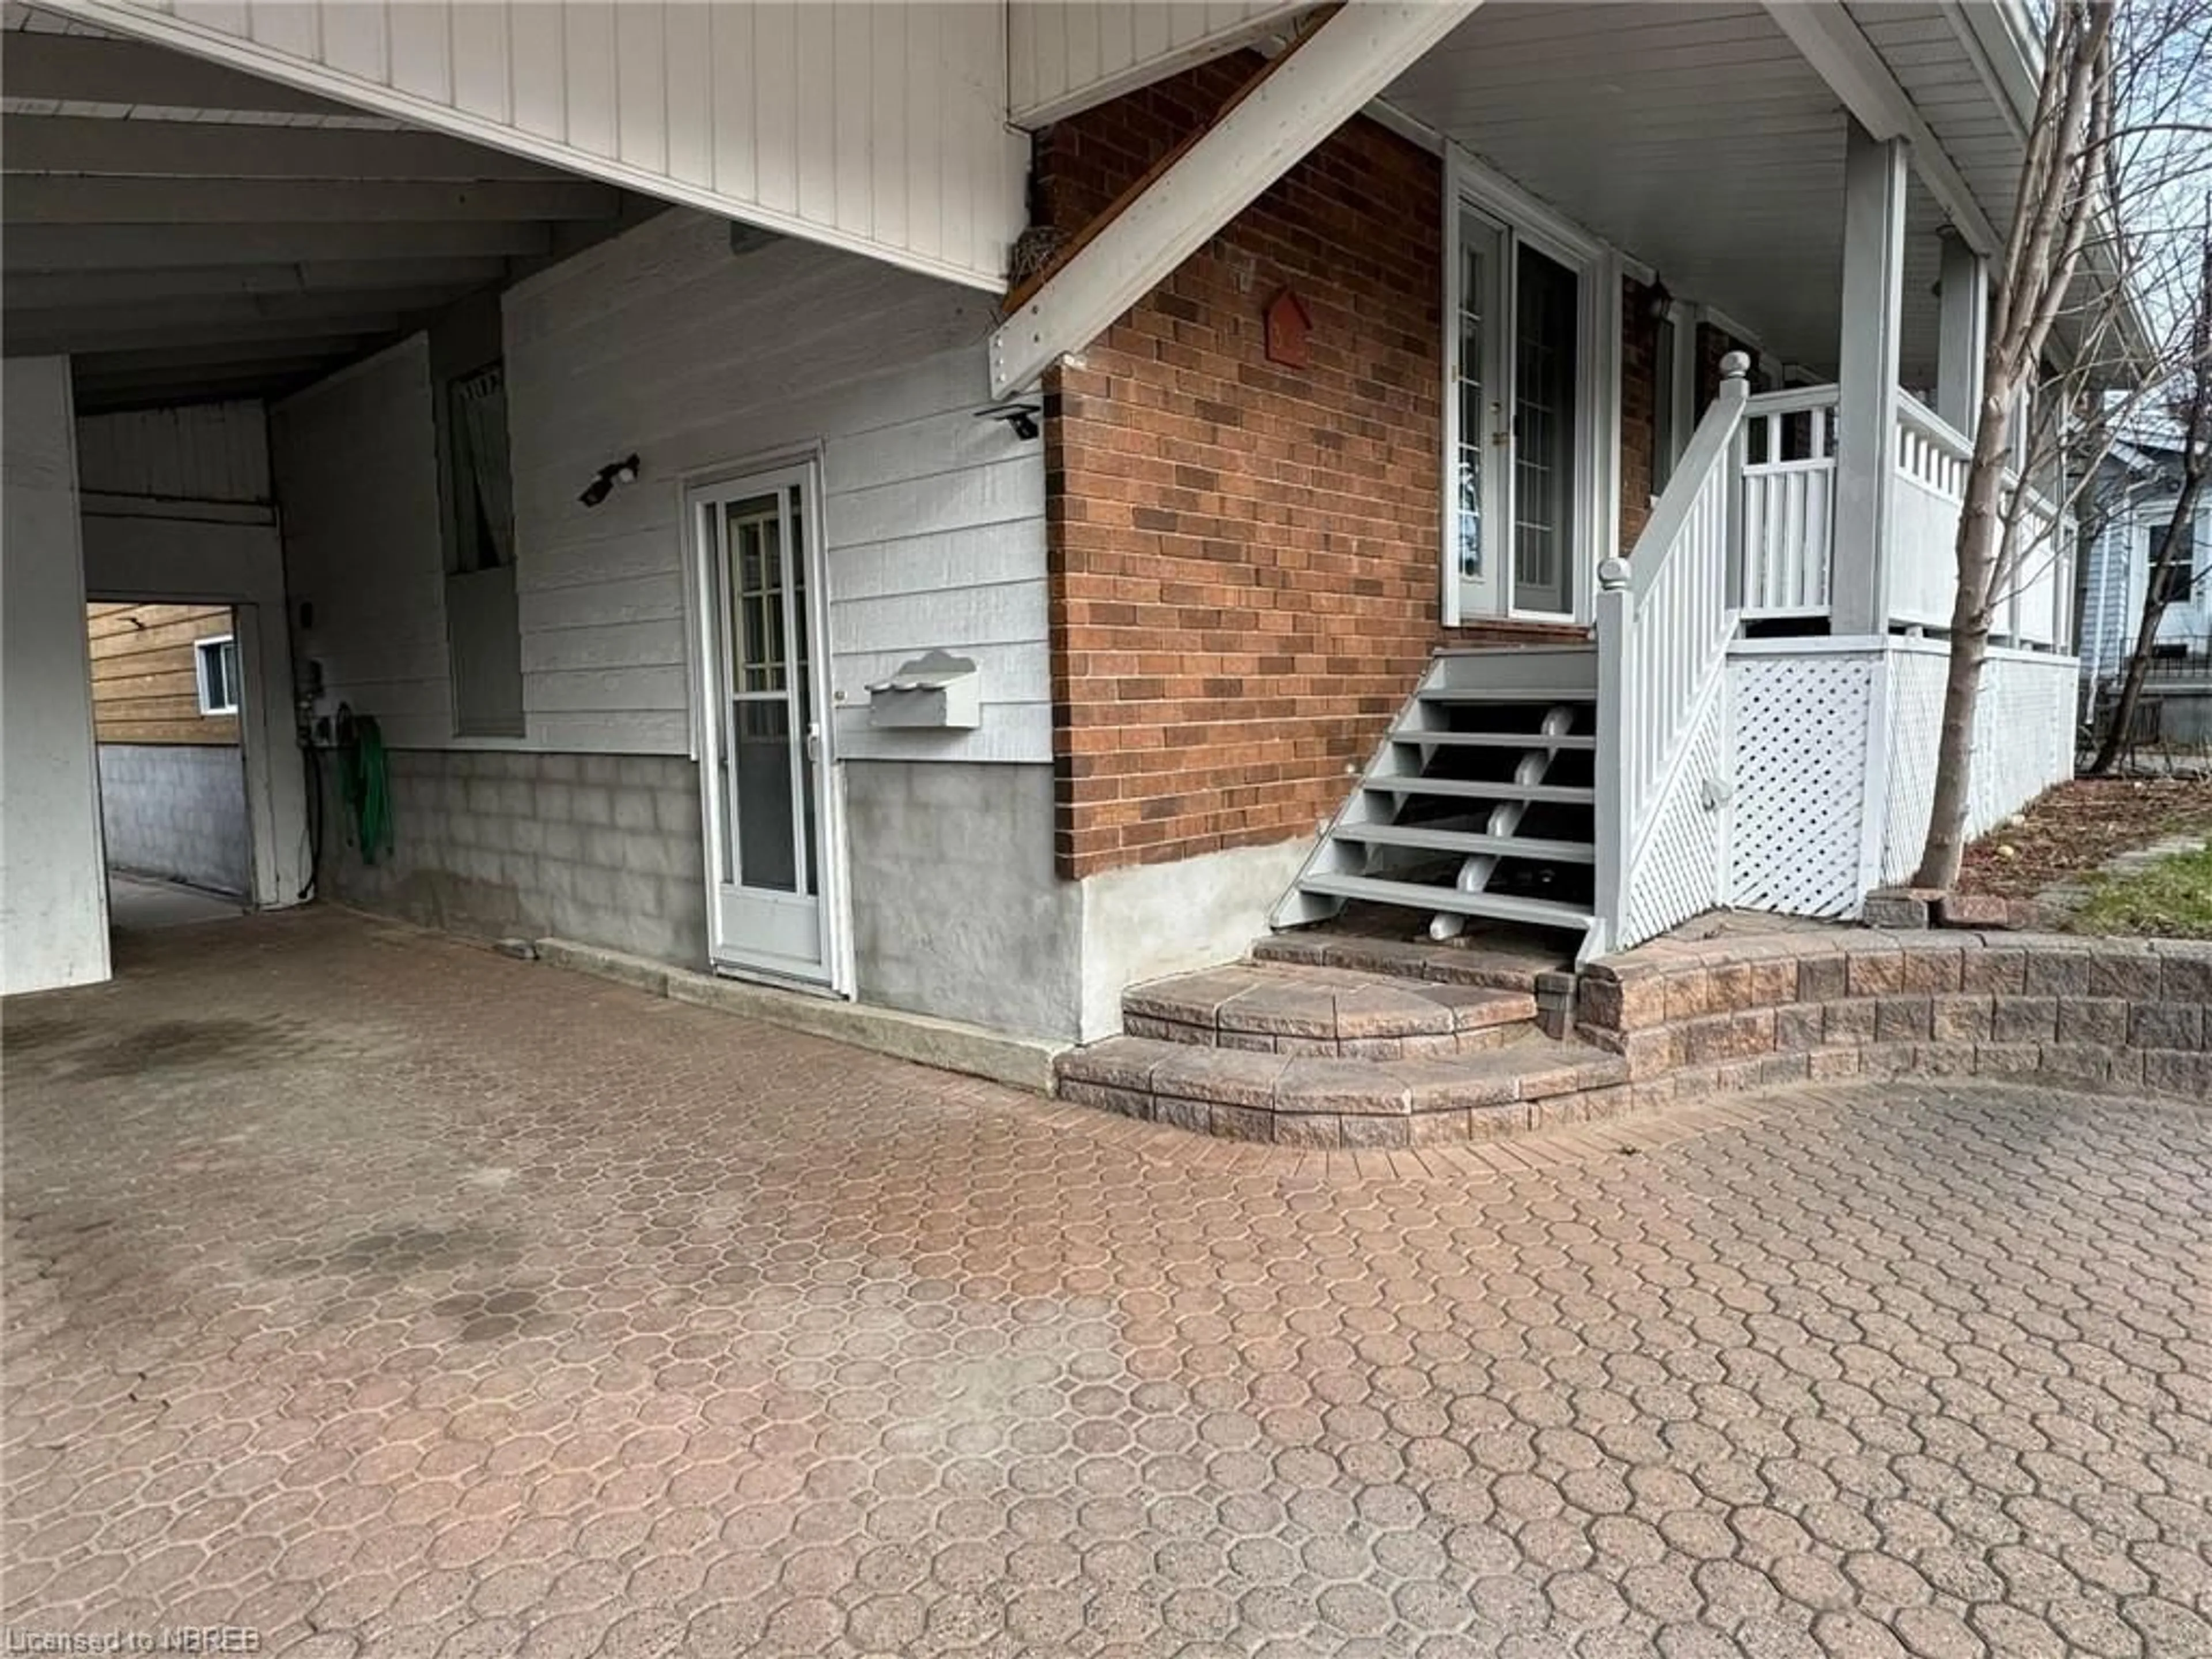 Outside view for 345 Aubrey St, North Bay Ontario P1B 6H8